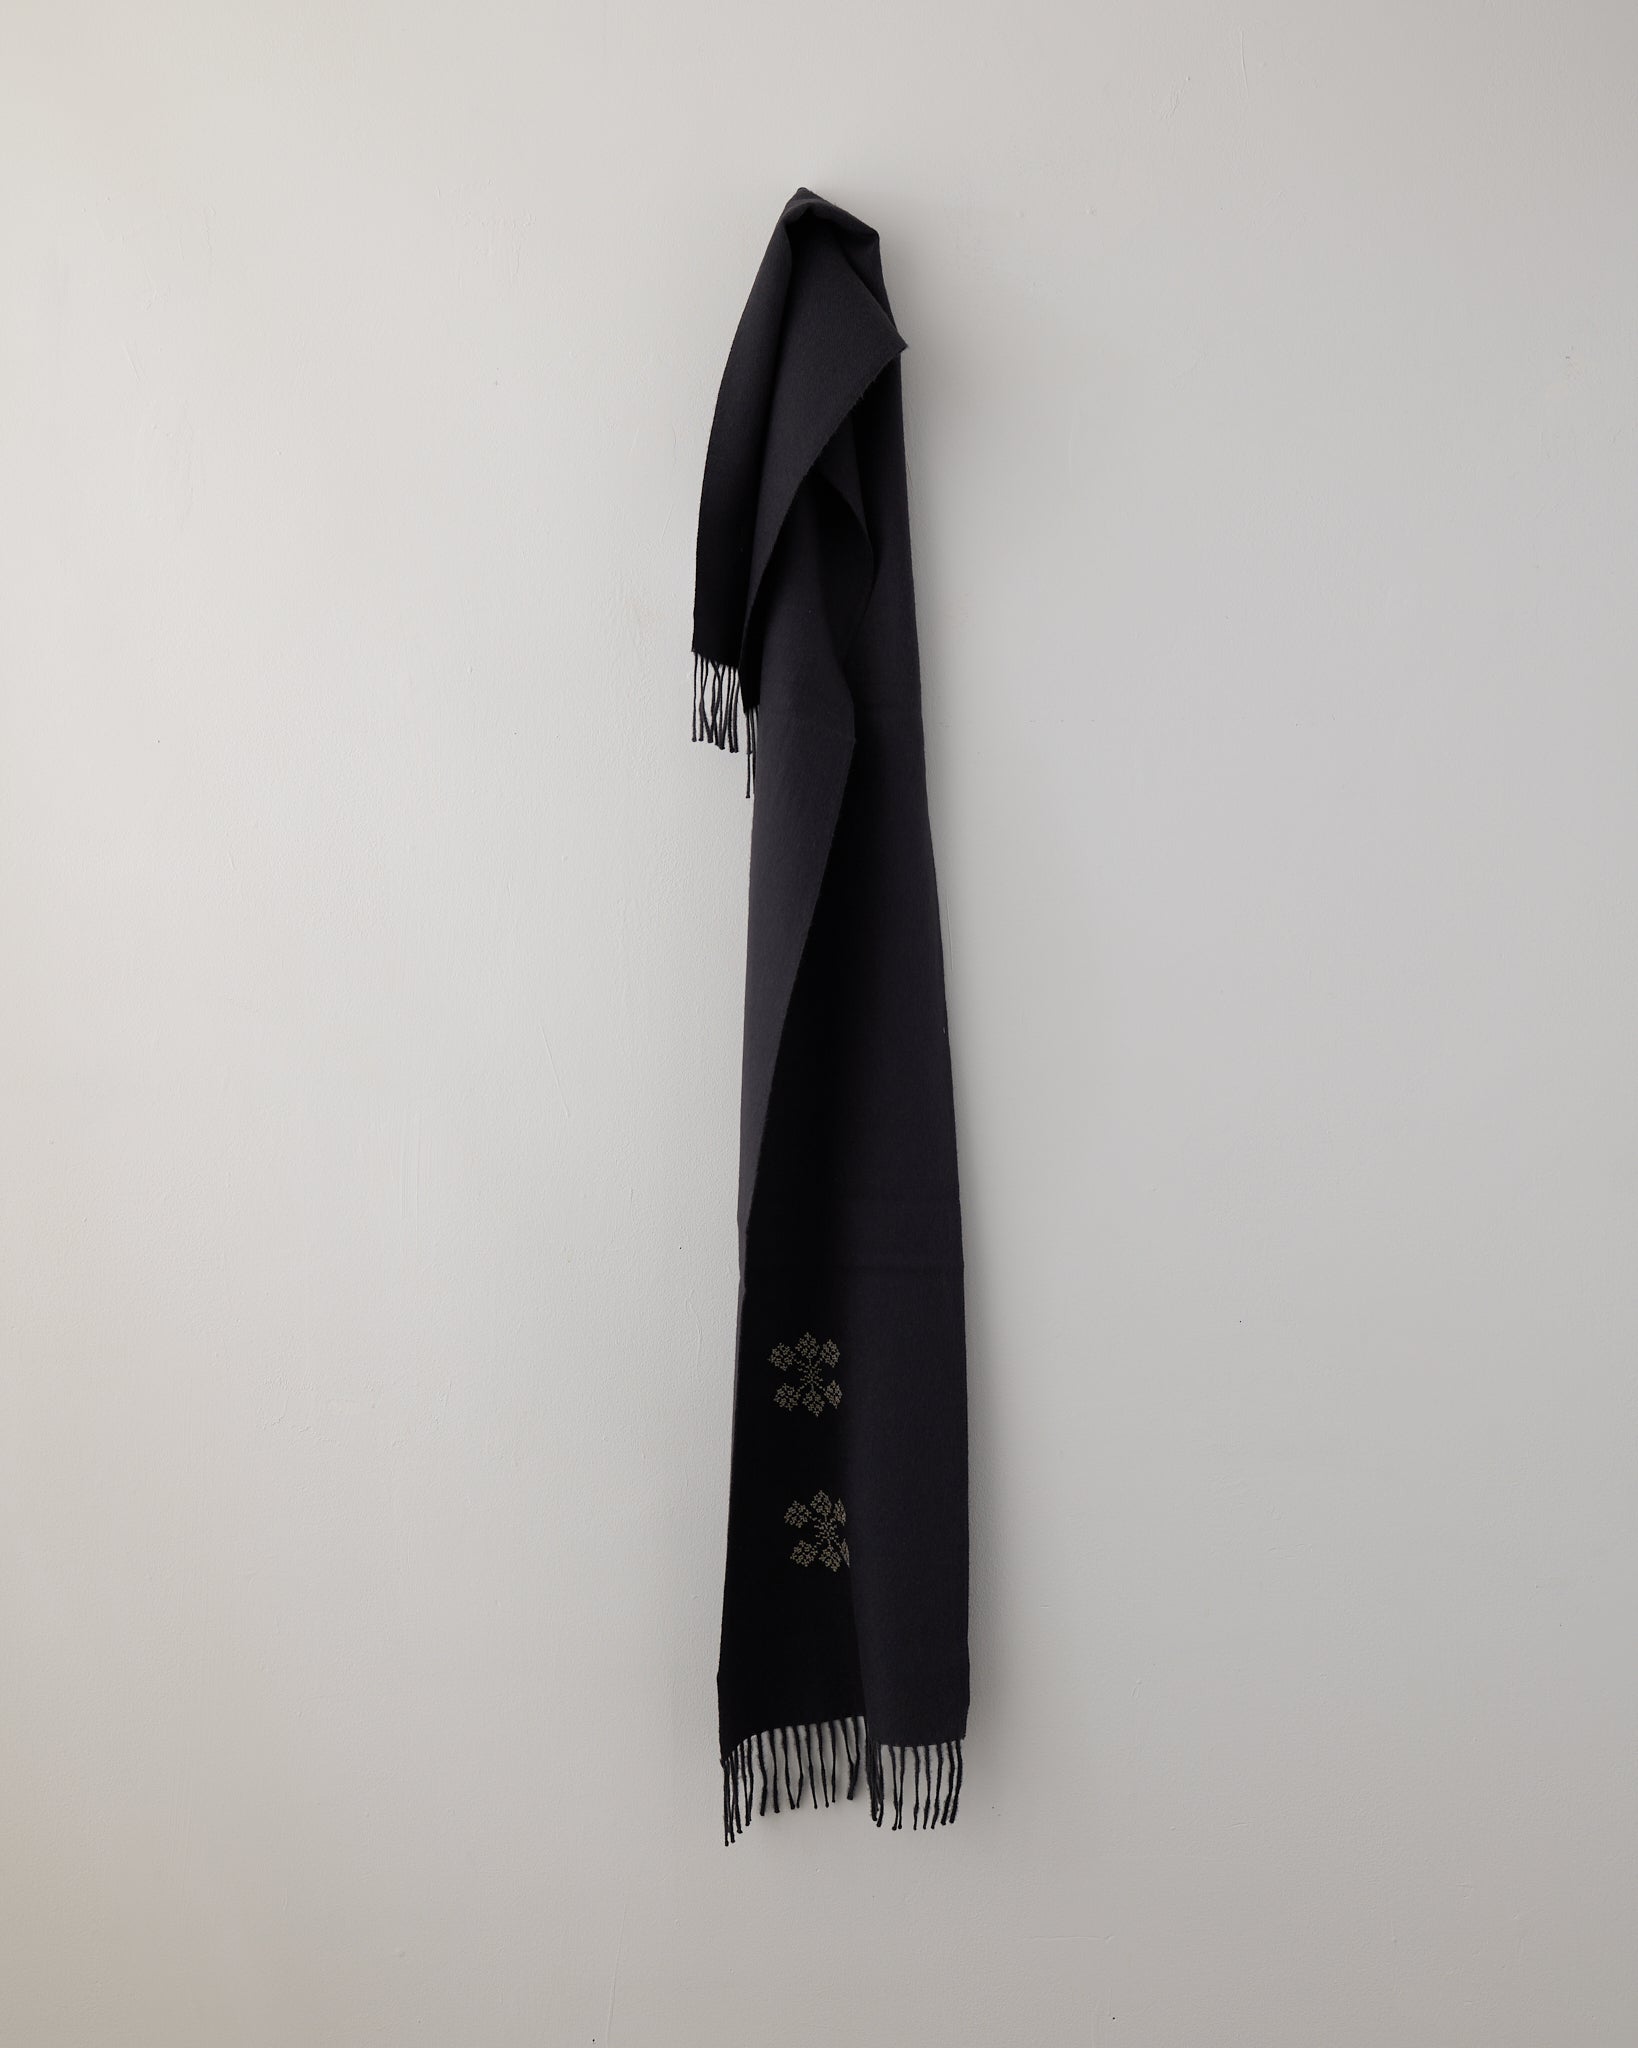 The Inoue Brothers Up-Cycled Alpaca Scarf